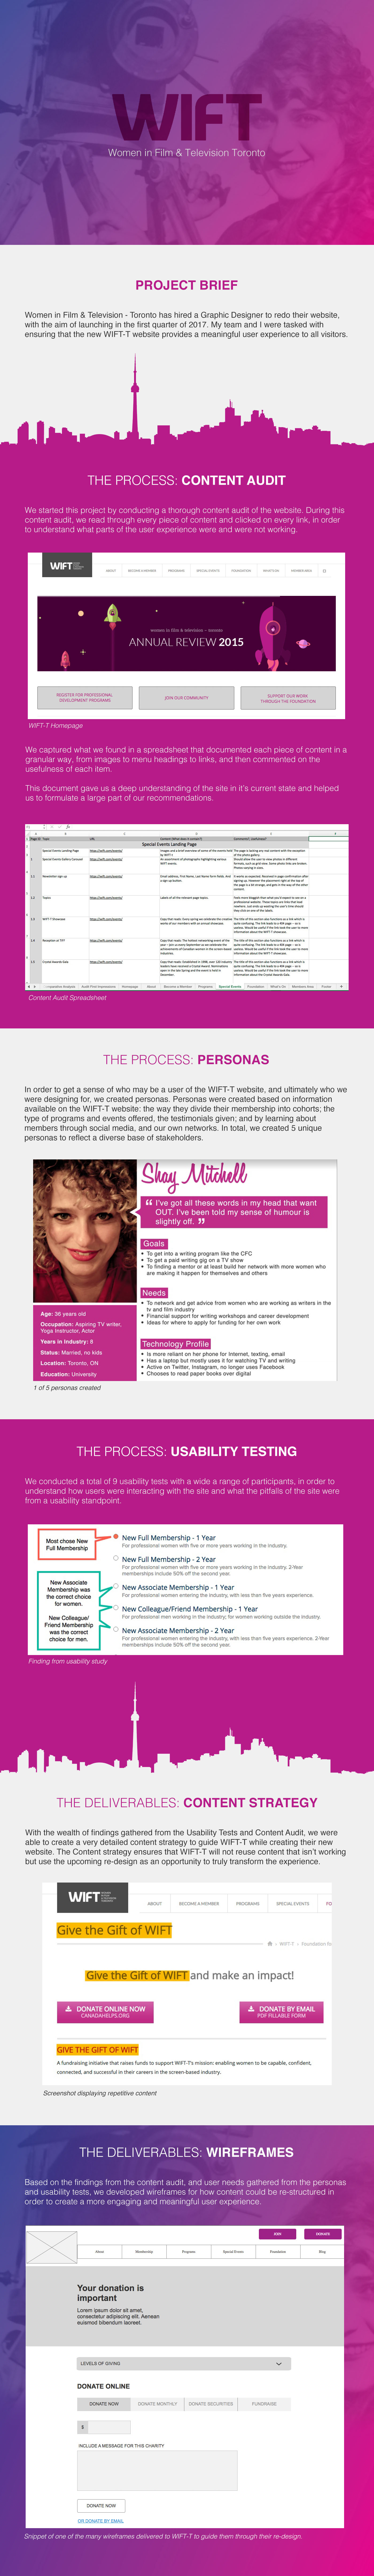 user experience content strategy usability testing wireframes personas Women in FIlm content audit Website Design